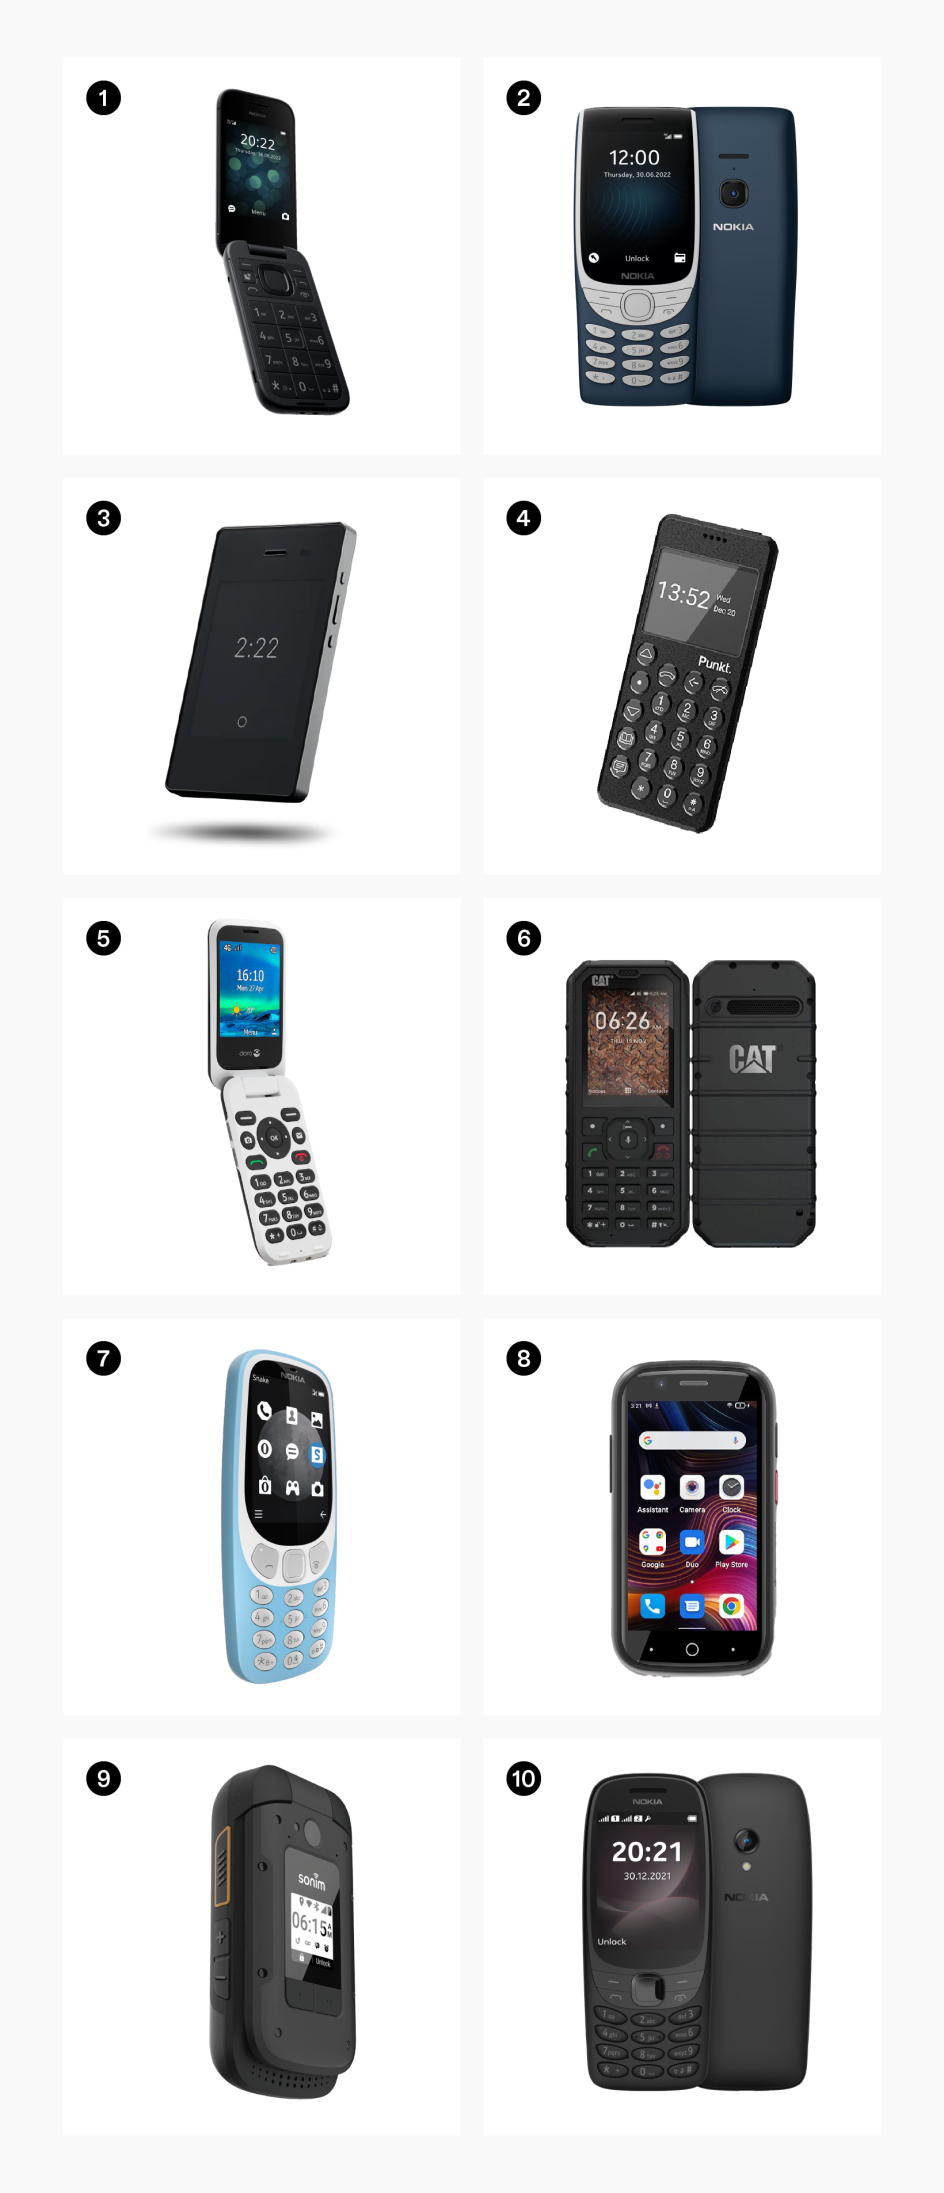 Retro alert: these popular Nokia mobile phones will be relaunched